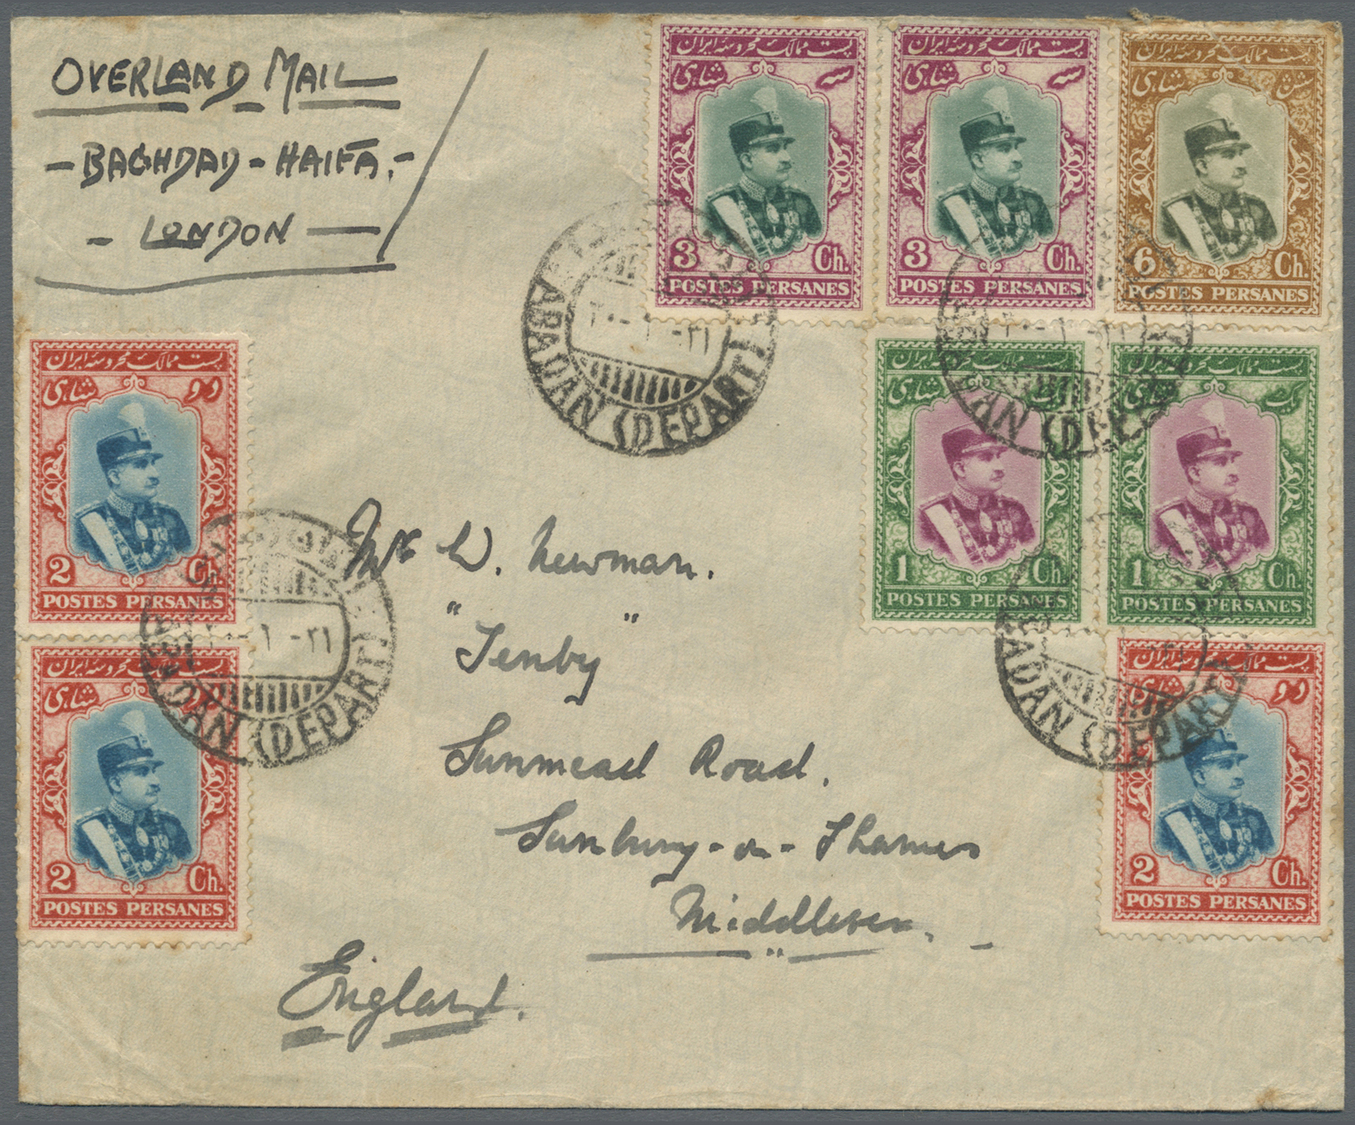 Br Iran: 1931, Two Covers Showing Ms. "OVERLAND MAIL BAGHDAD HAIFA LONDON", Some Toned Spots, Fine Pair - Iran